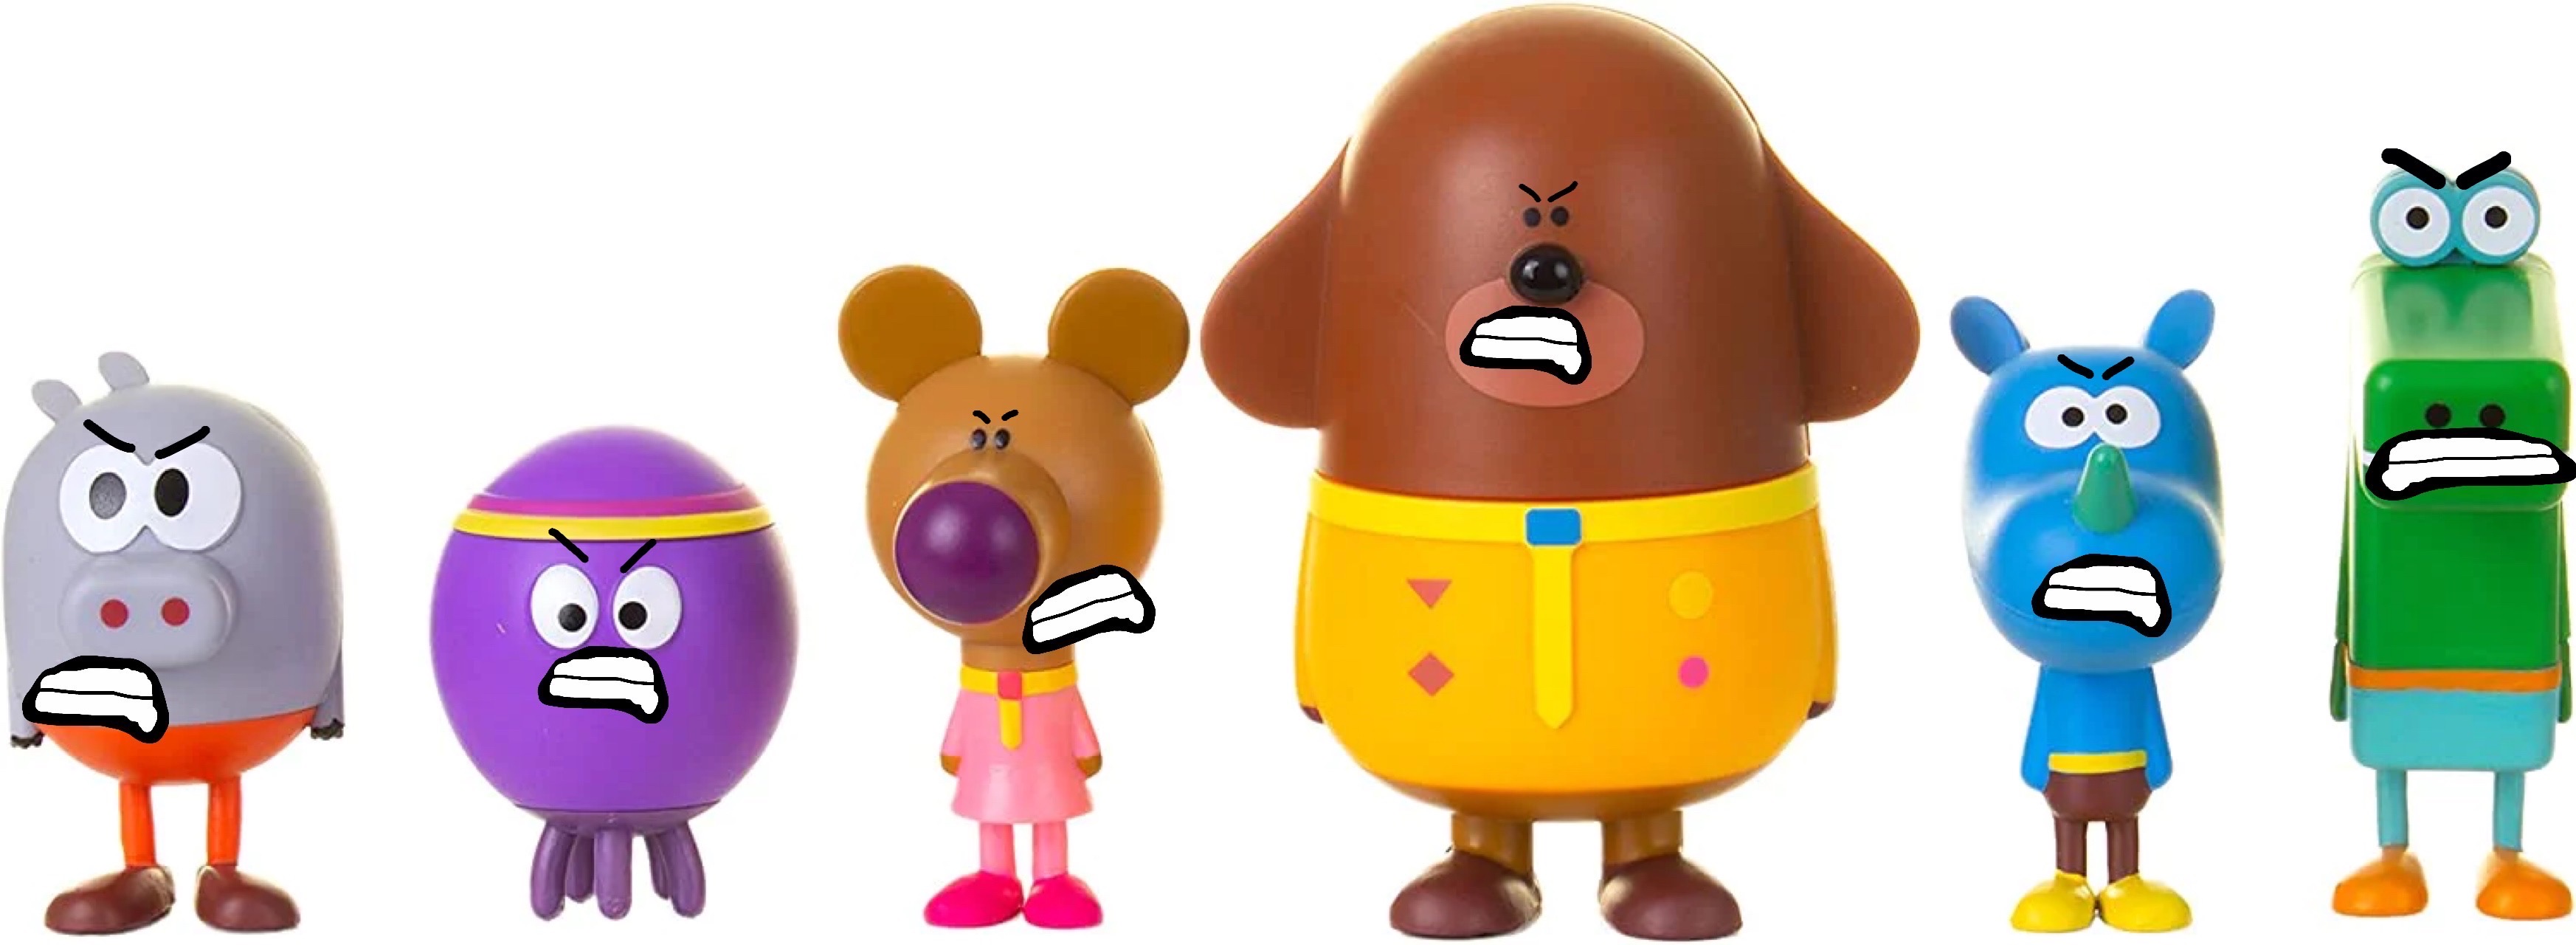 hey duggee as shapes by Sargine on DeviantArt